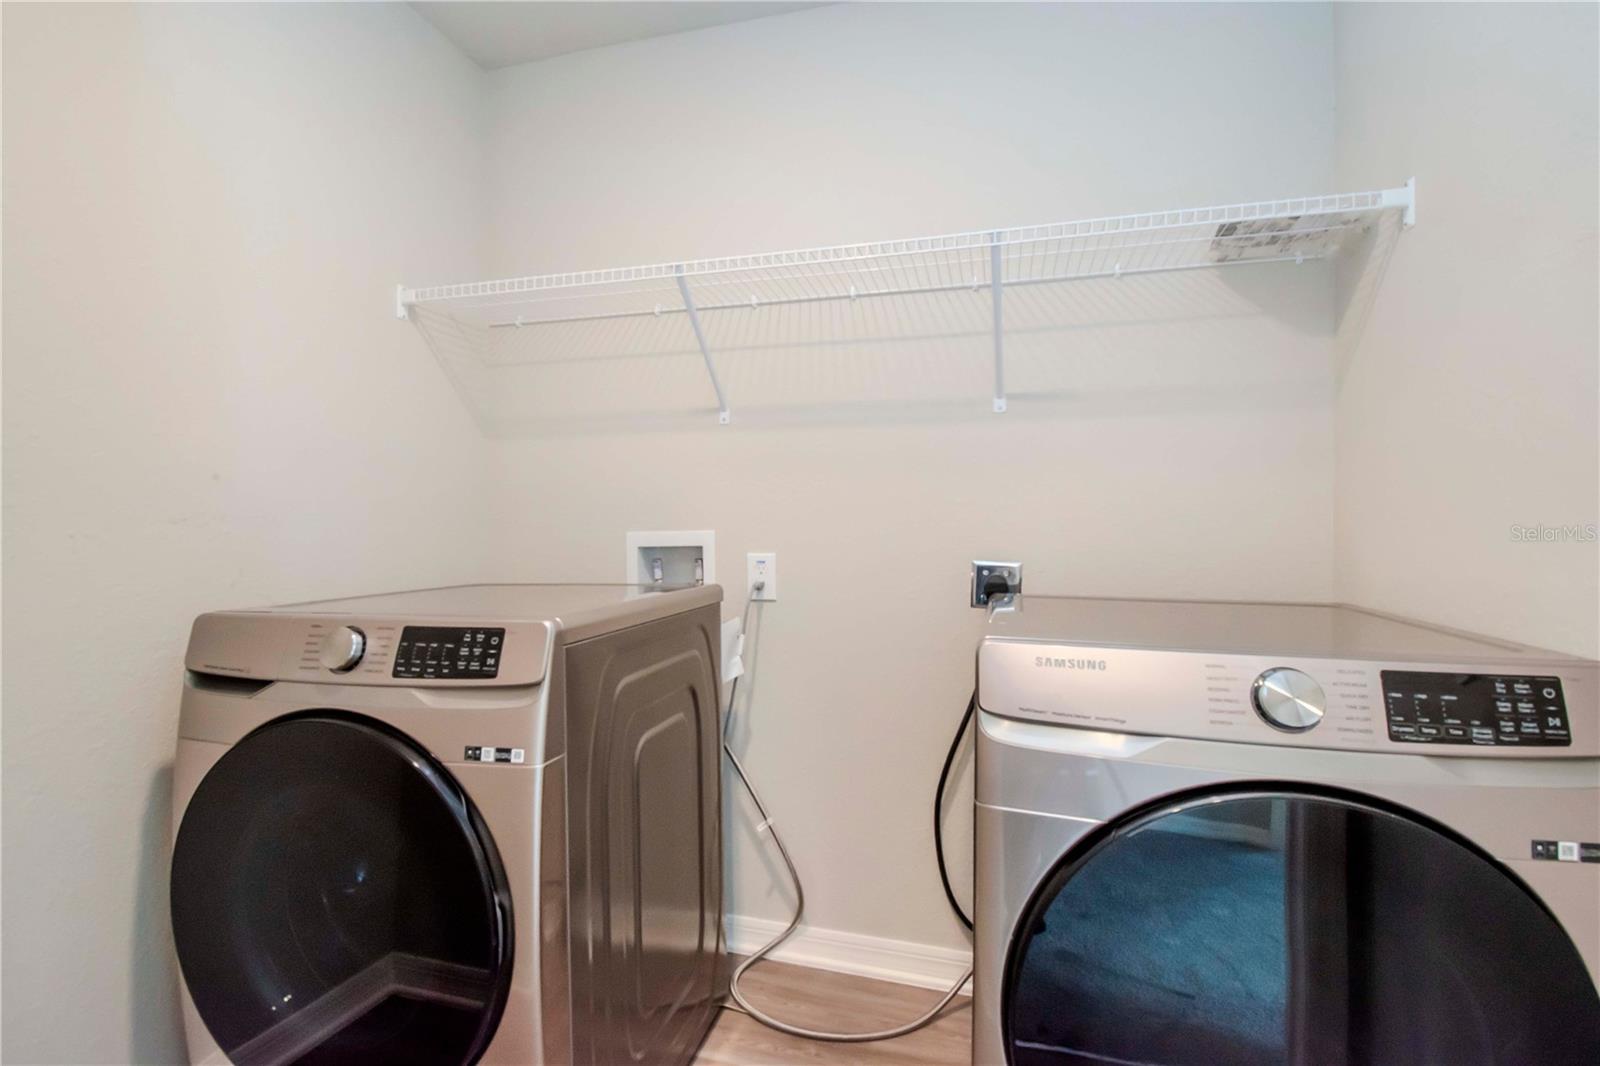 LAUNDRY ROOM W/SAMSUNG FRONT LOAD WASHER/DRYER